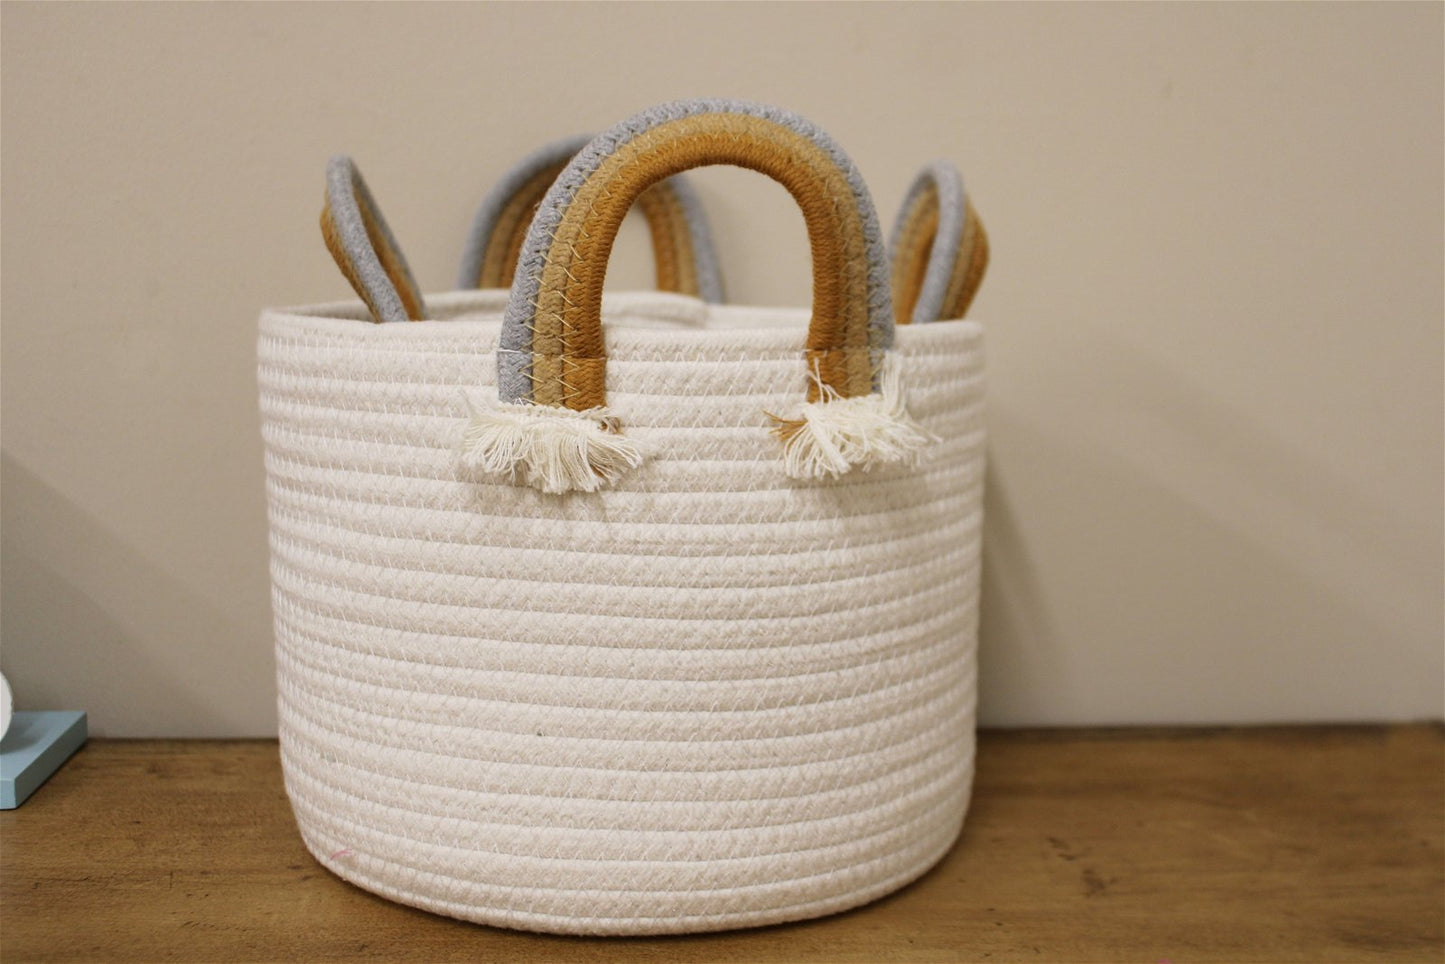 Pair of Baskets with Rainbow Handles